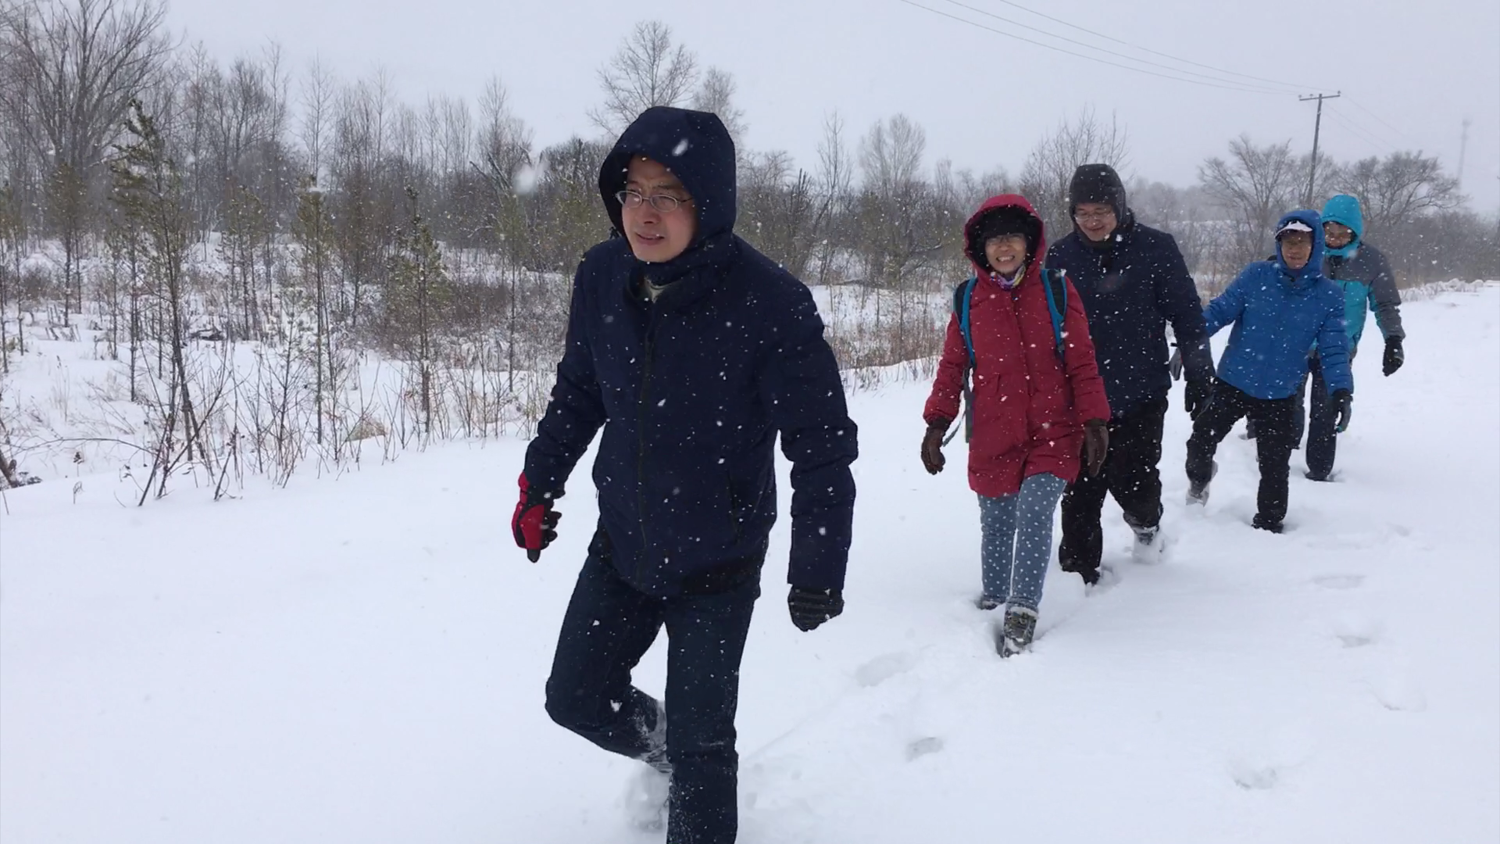 Dr. Xinlei Guo and his team walking with difficulty in heavy snow